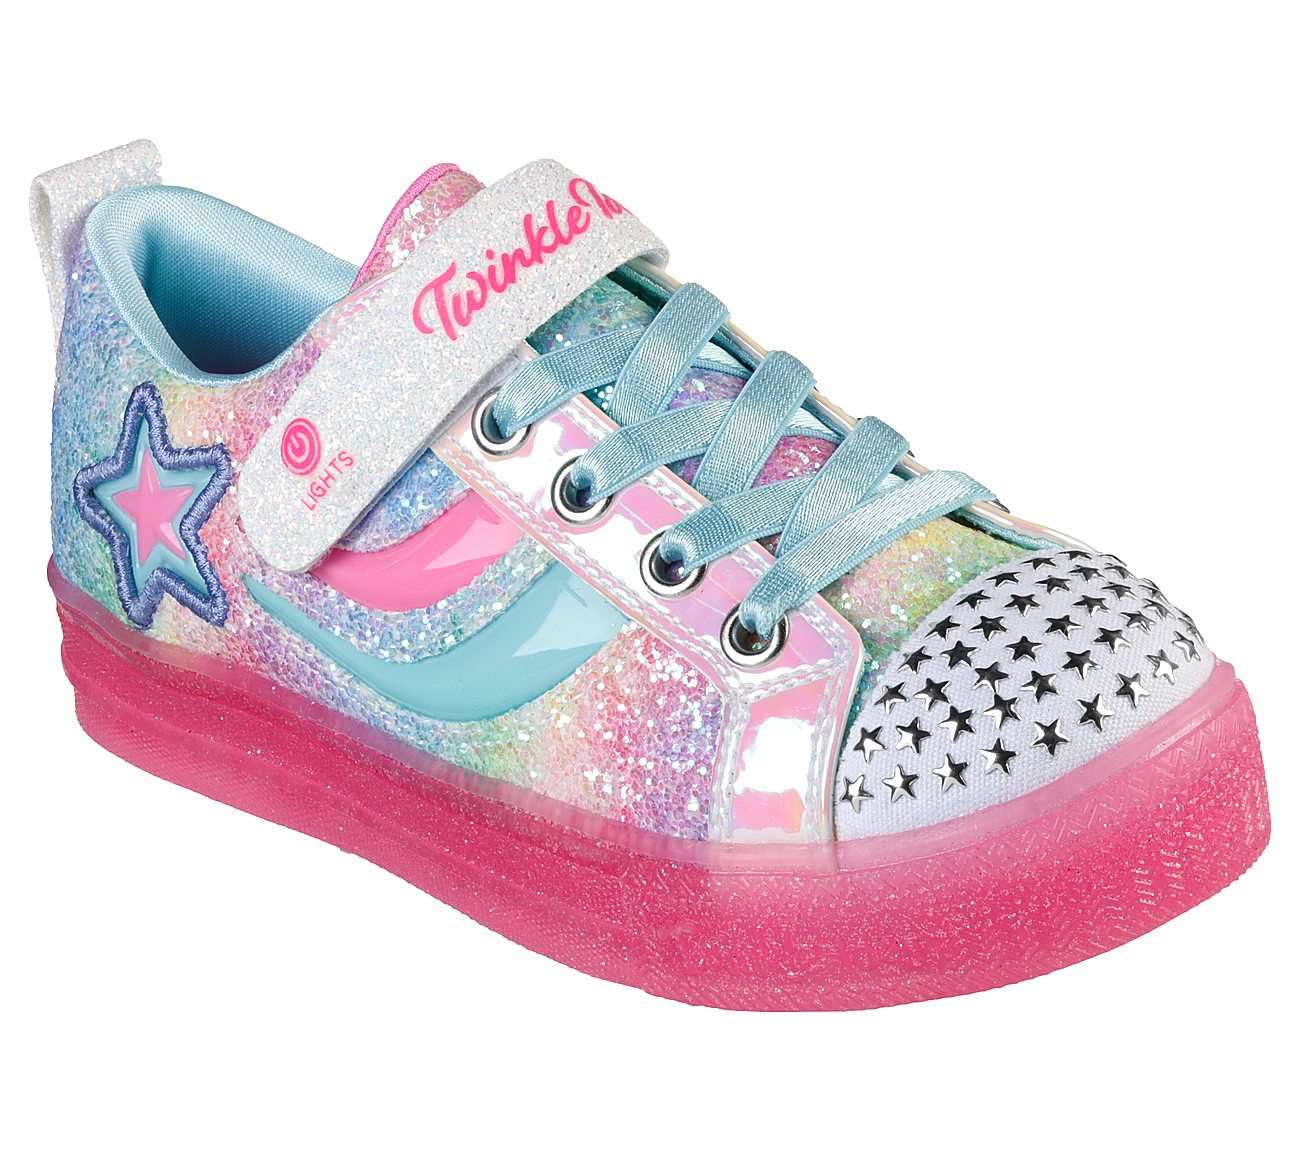 SHUFFLE BRIGHTS-SHOOTING STAR, MULTI Footwear Lateral View